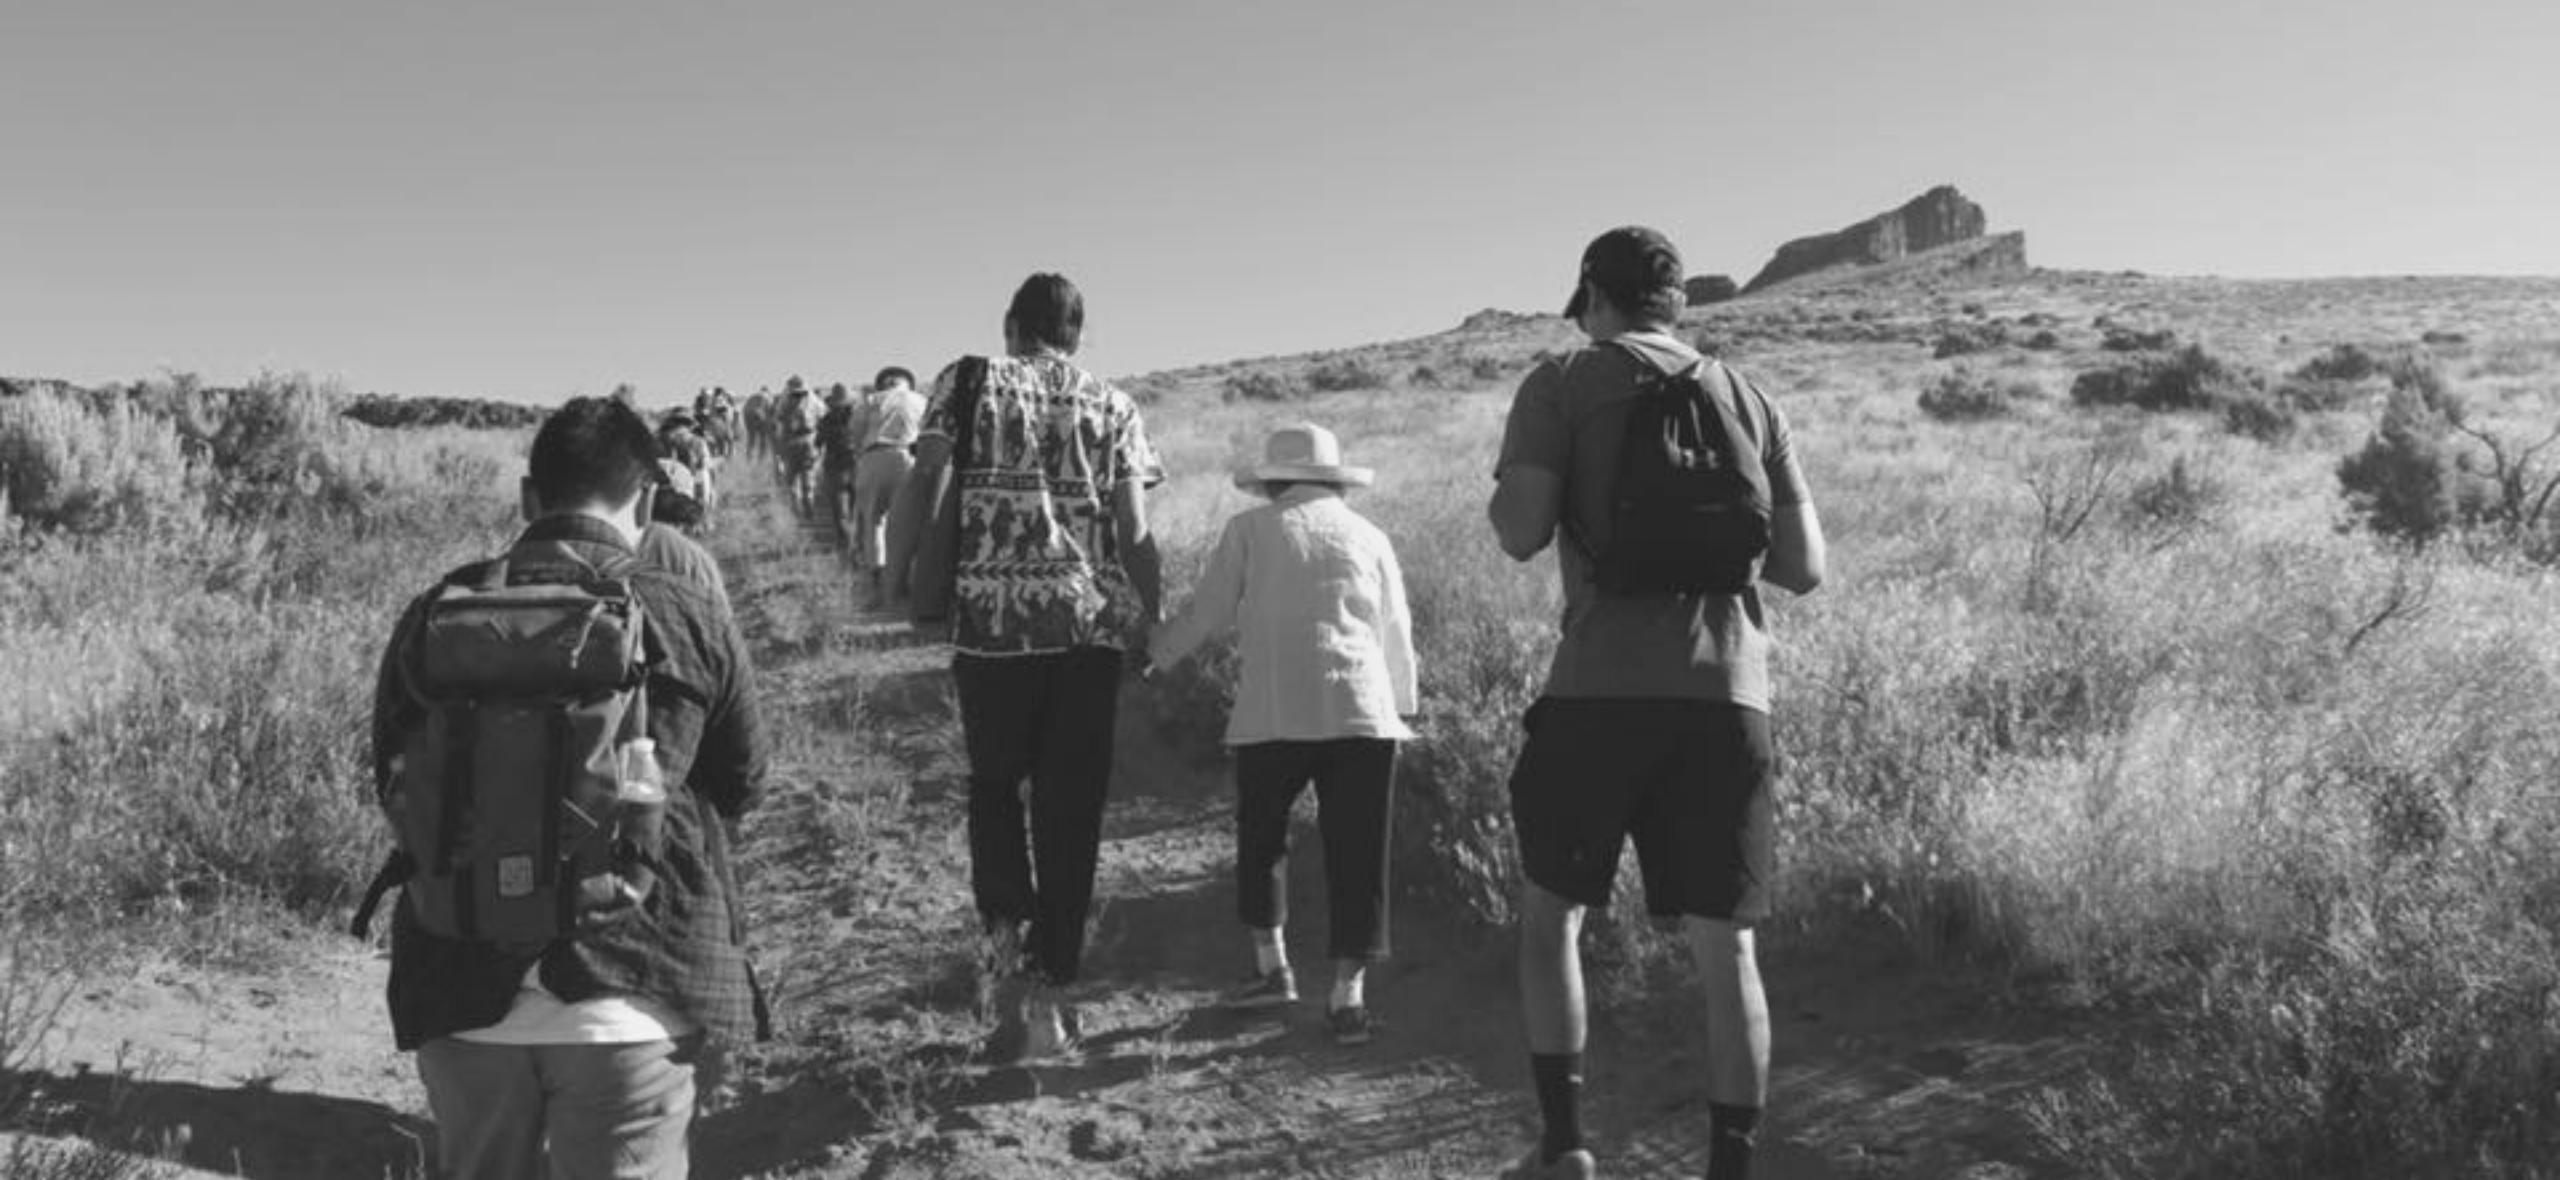 Descendants of incarcerees and their family hike down a long path at a pilgrimage to a Japanese American incarceration site